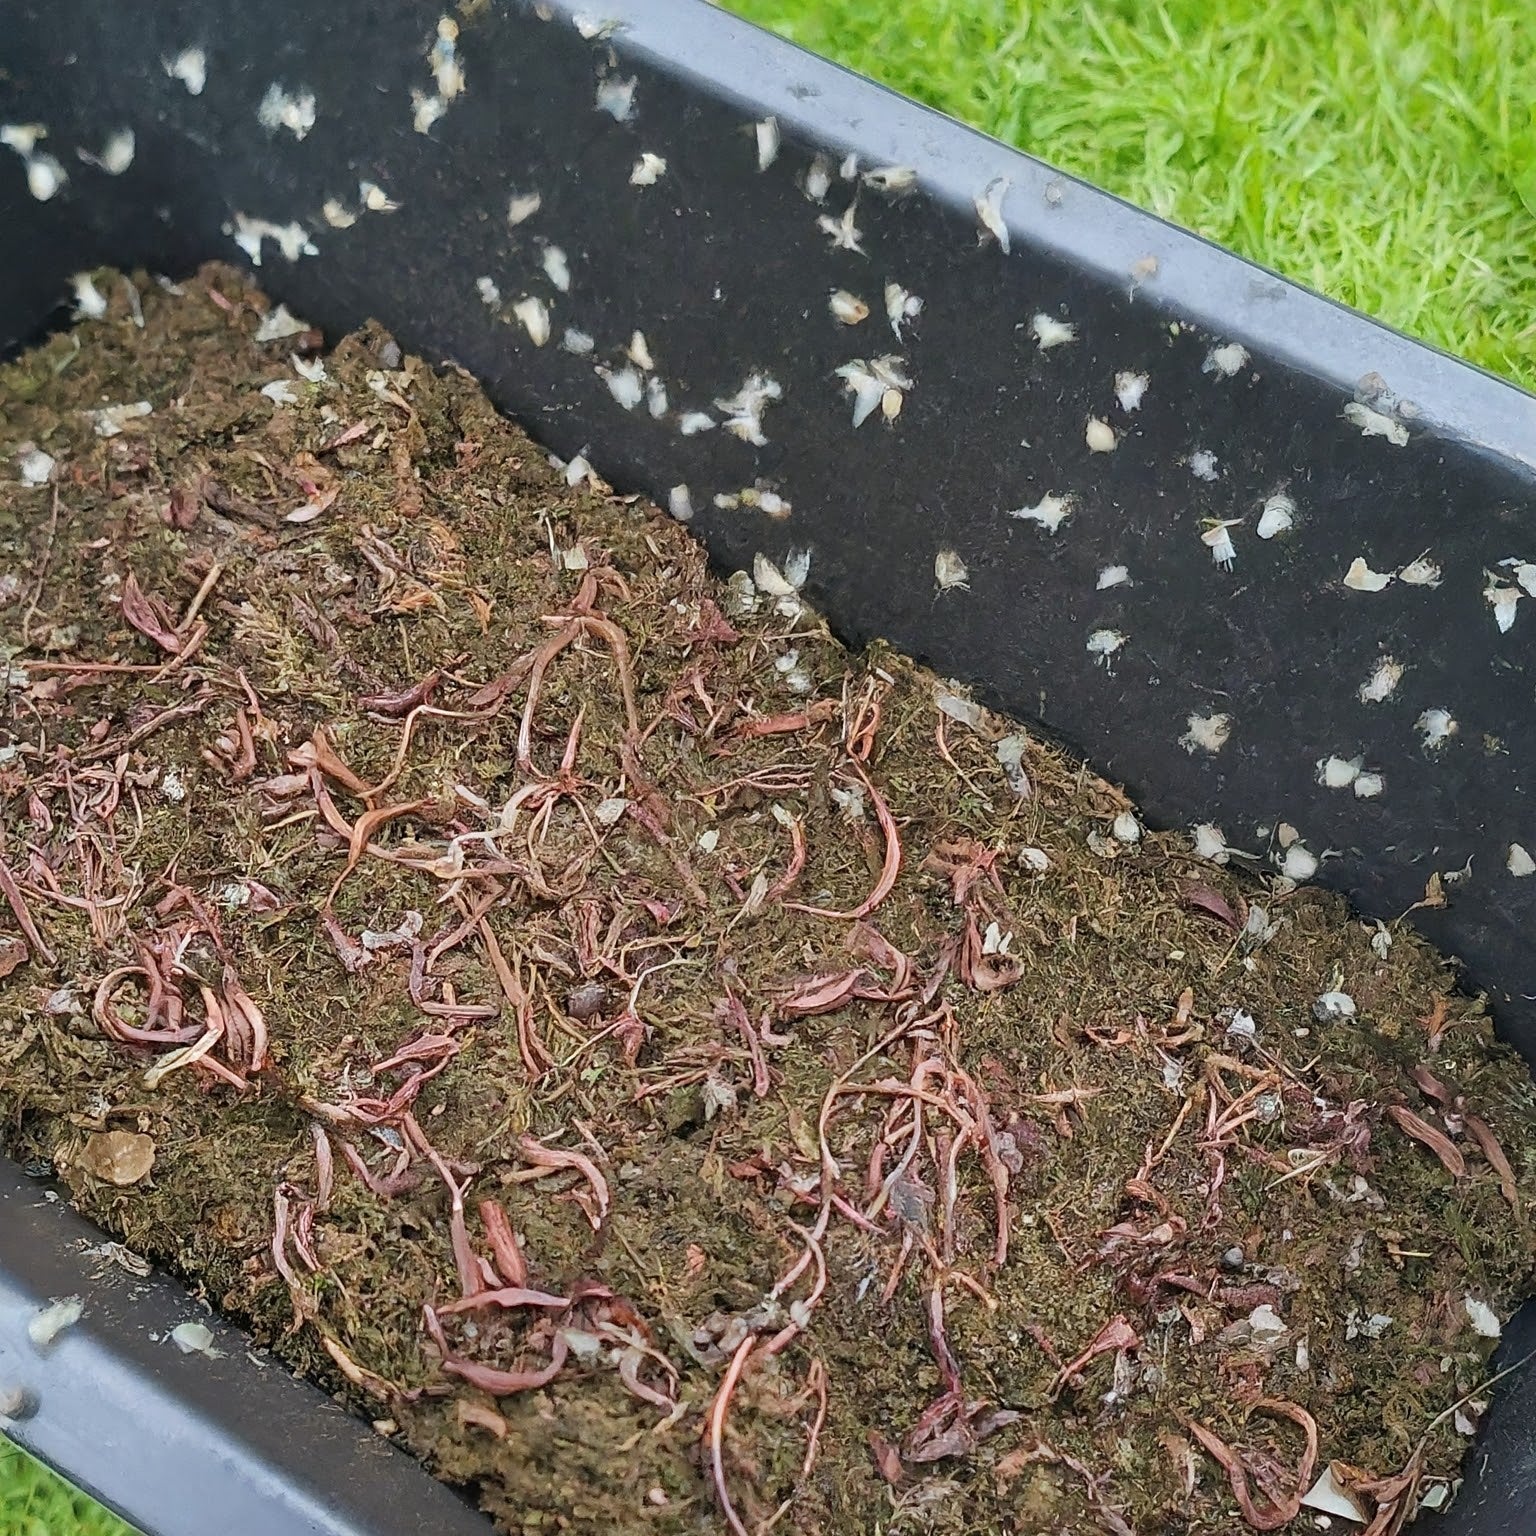 Guide to the 6 Most Common Worm Farm Problems & How to Solve Them